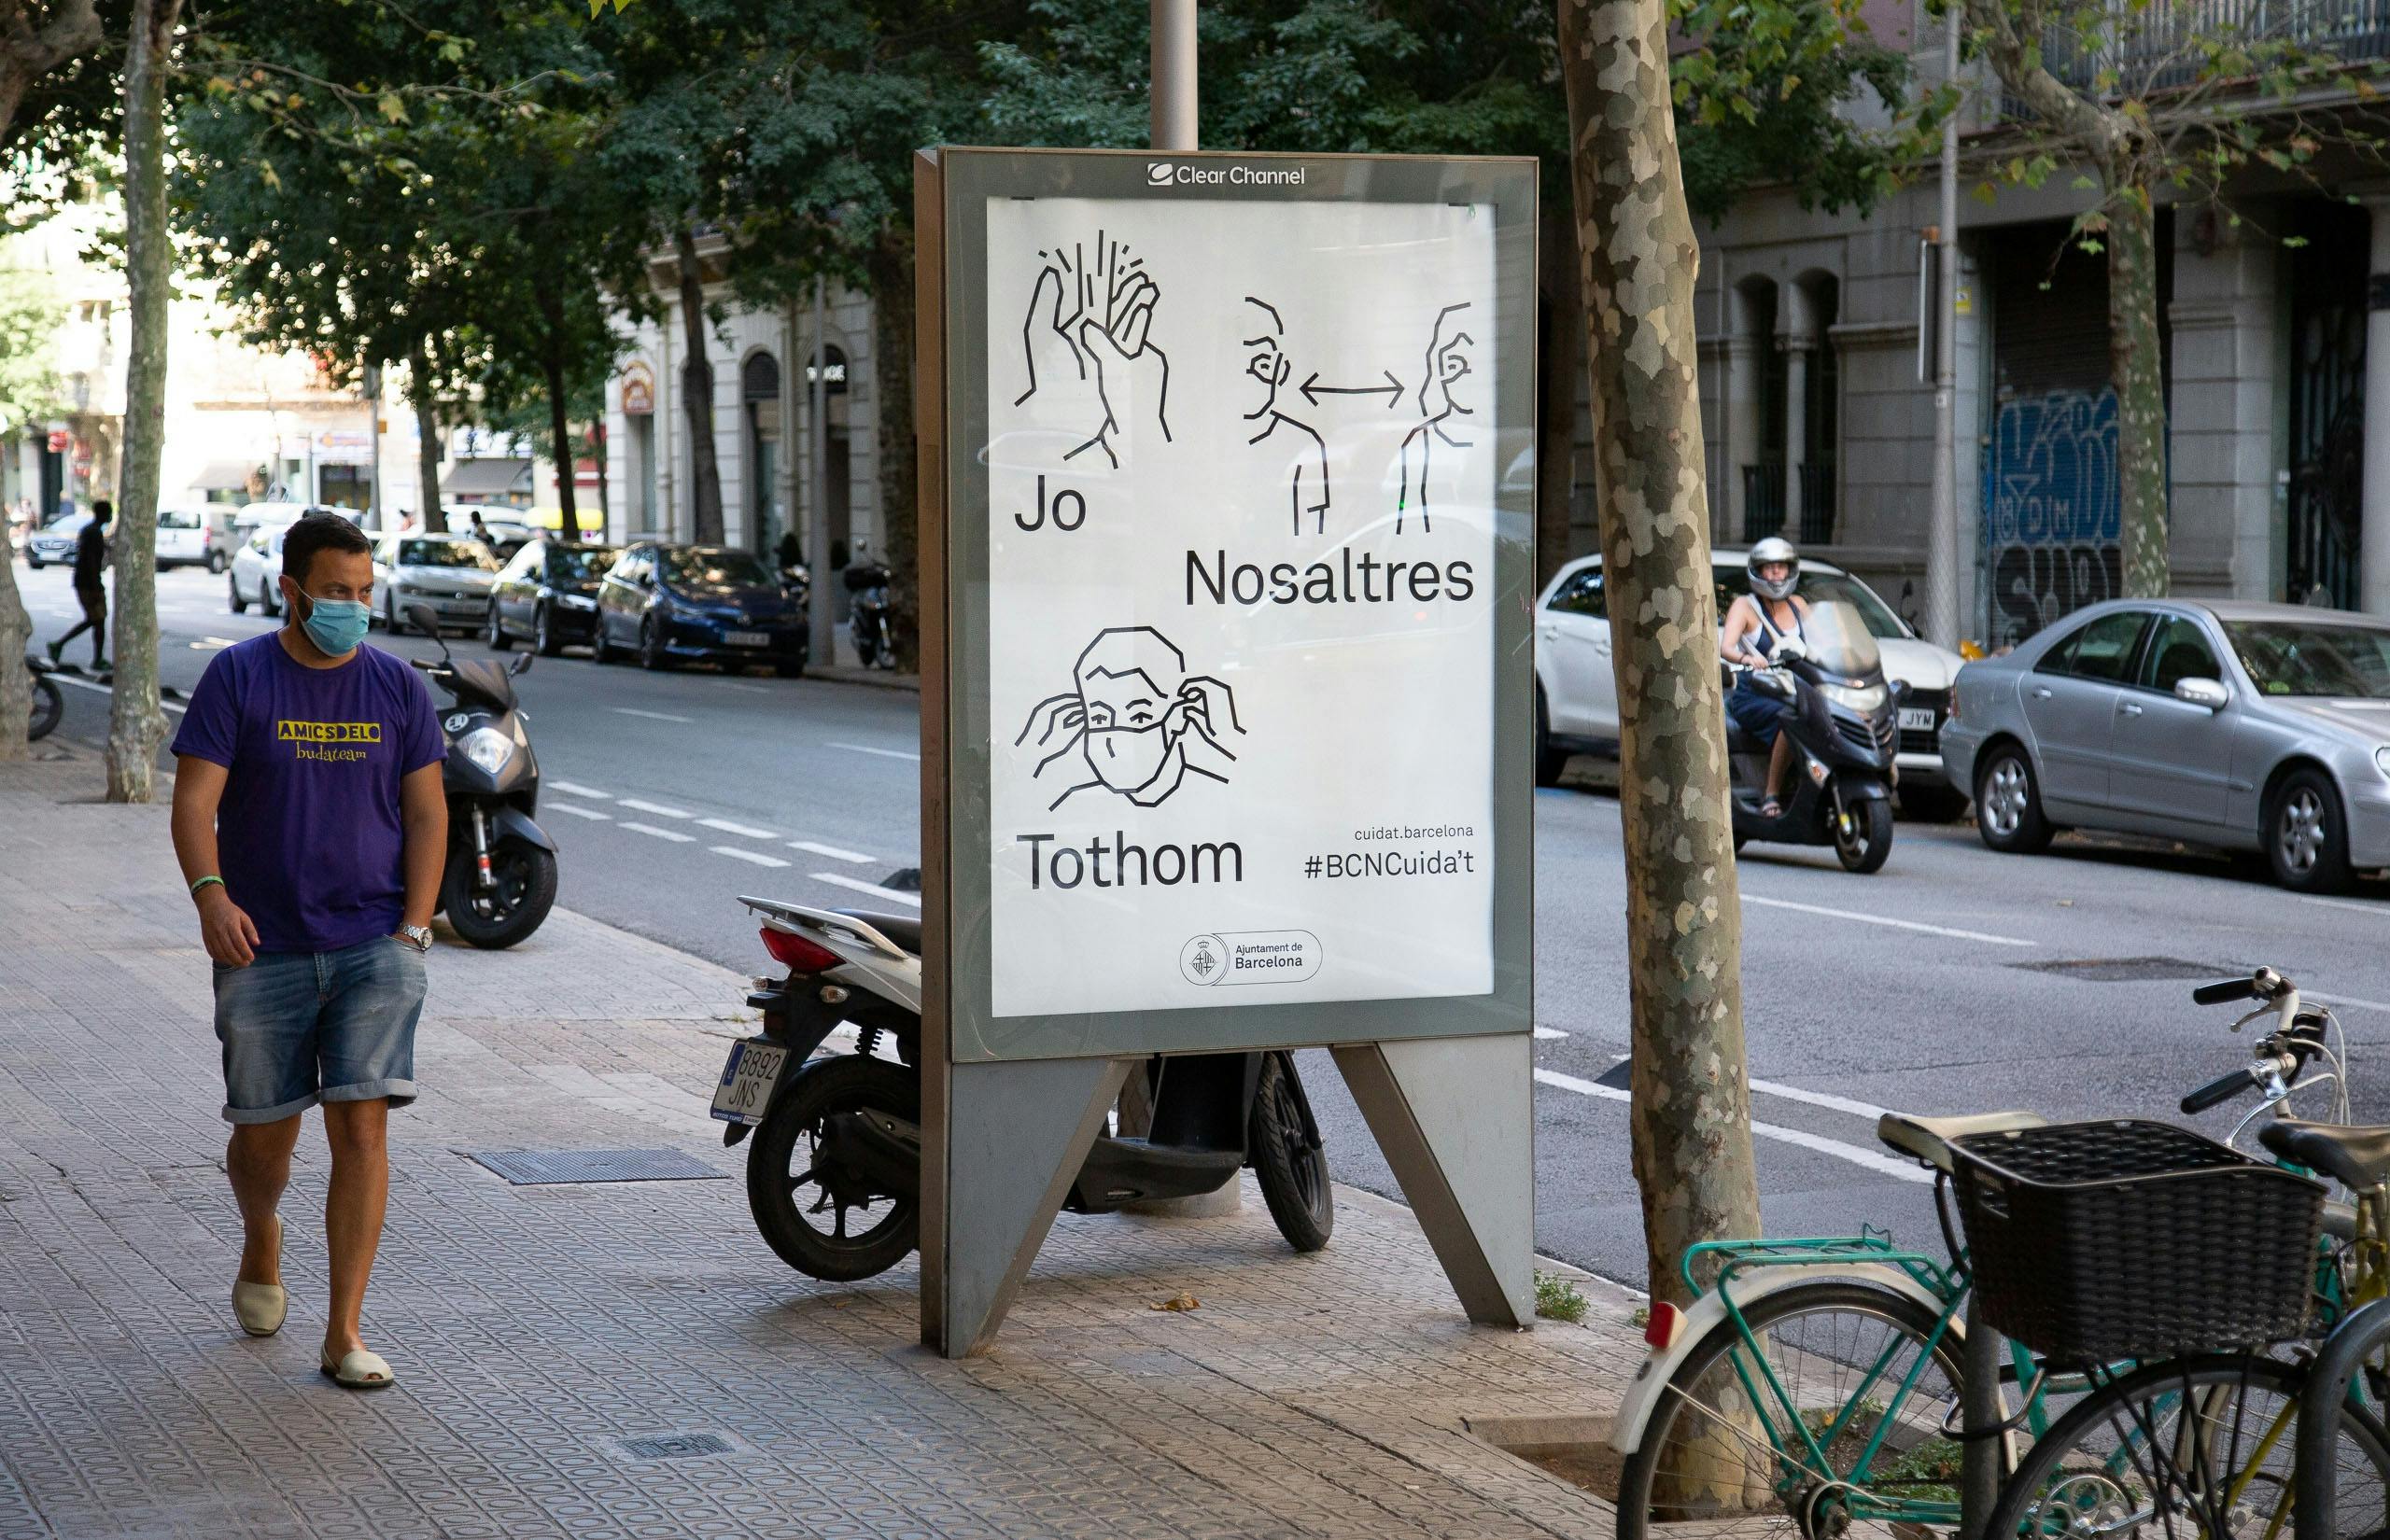 graphic design studio Familia designed ‘Jo Nosaltres Tothom’ (Me Us Everybody), the COVID-19 awareness campaign for the city of Barcelona.